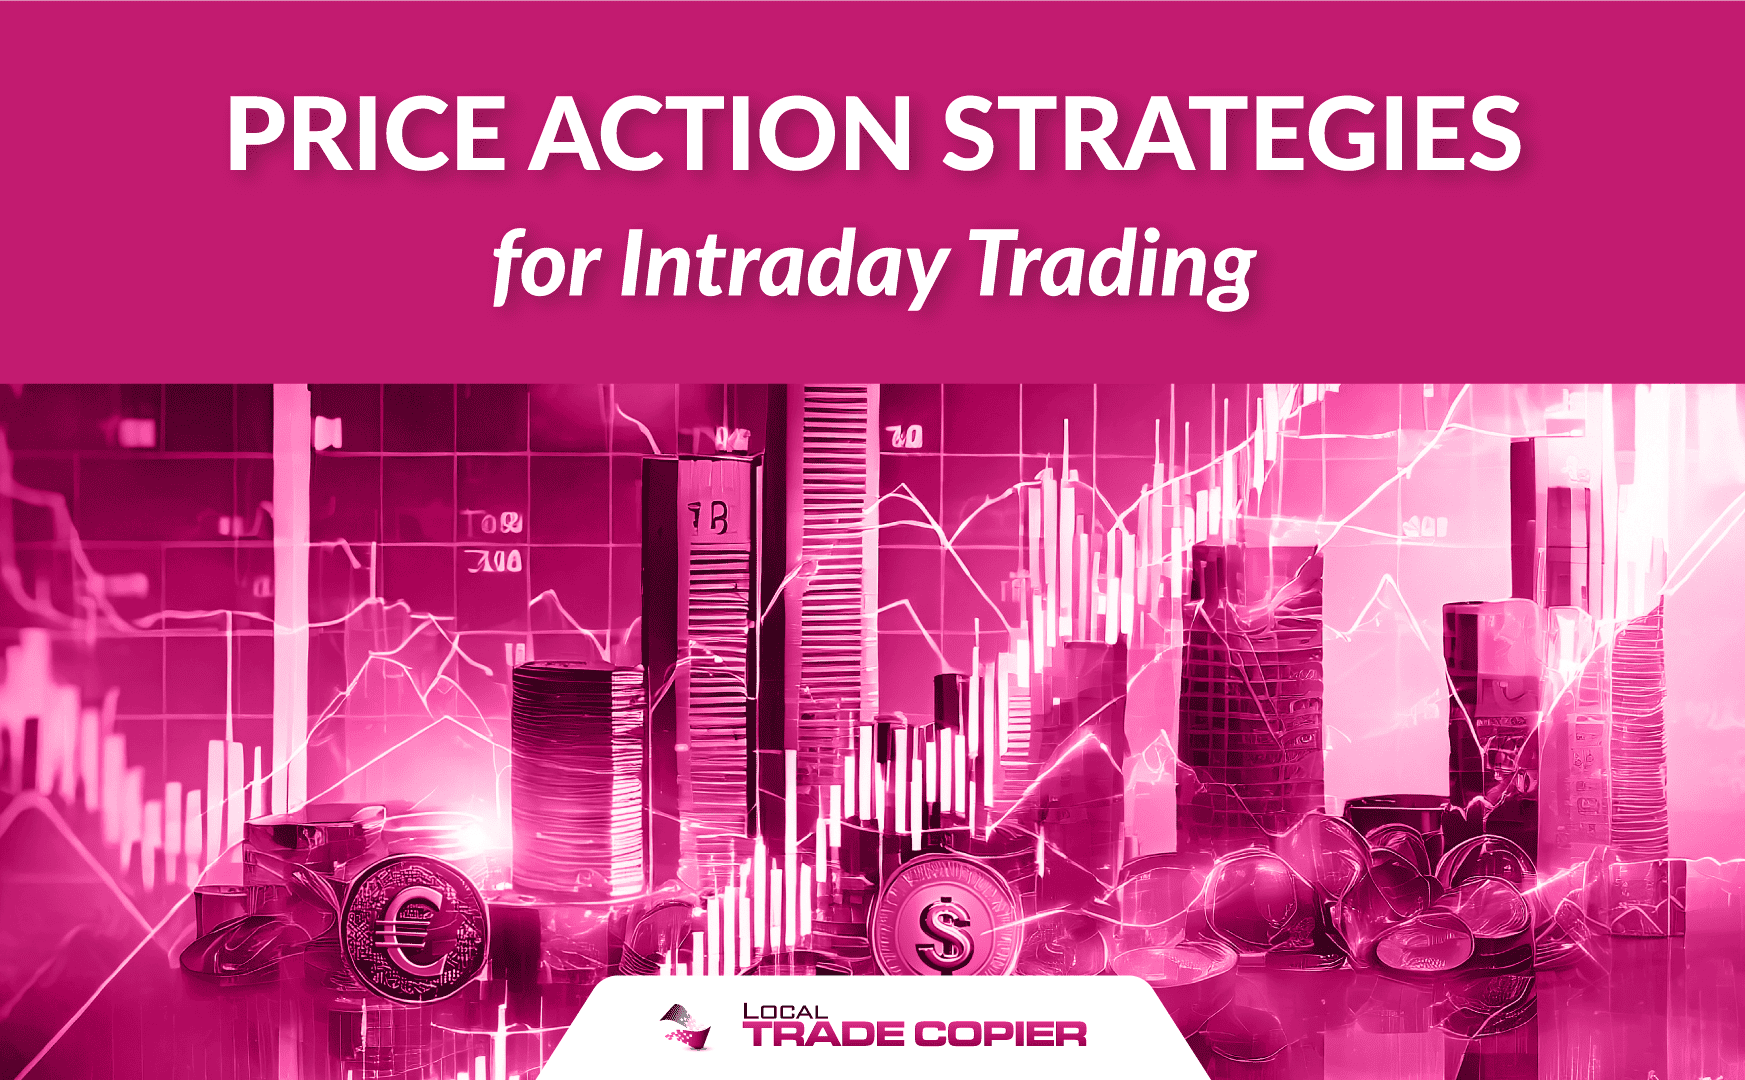 Price Action Strategies for Intraday Trading